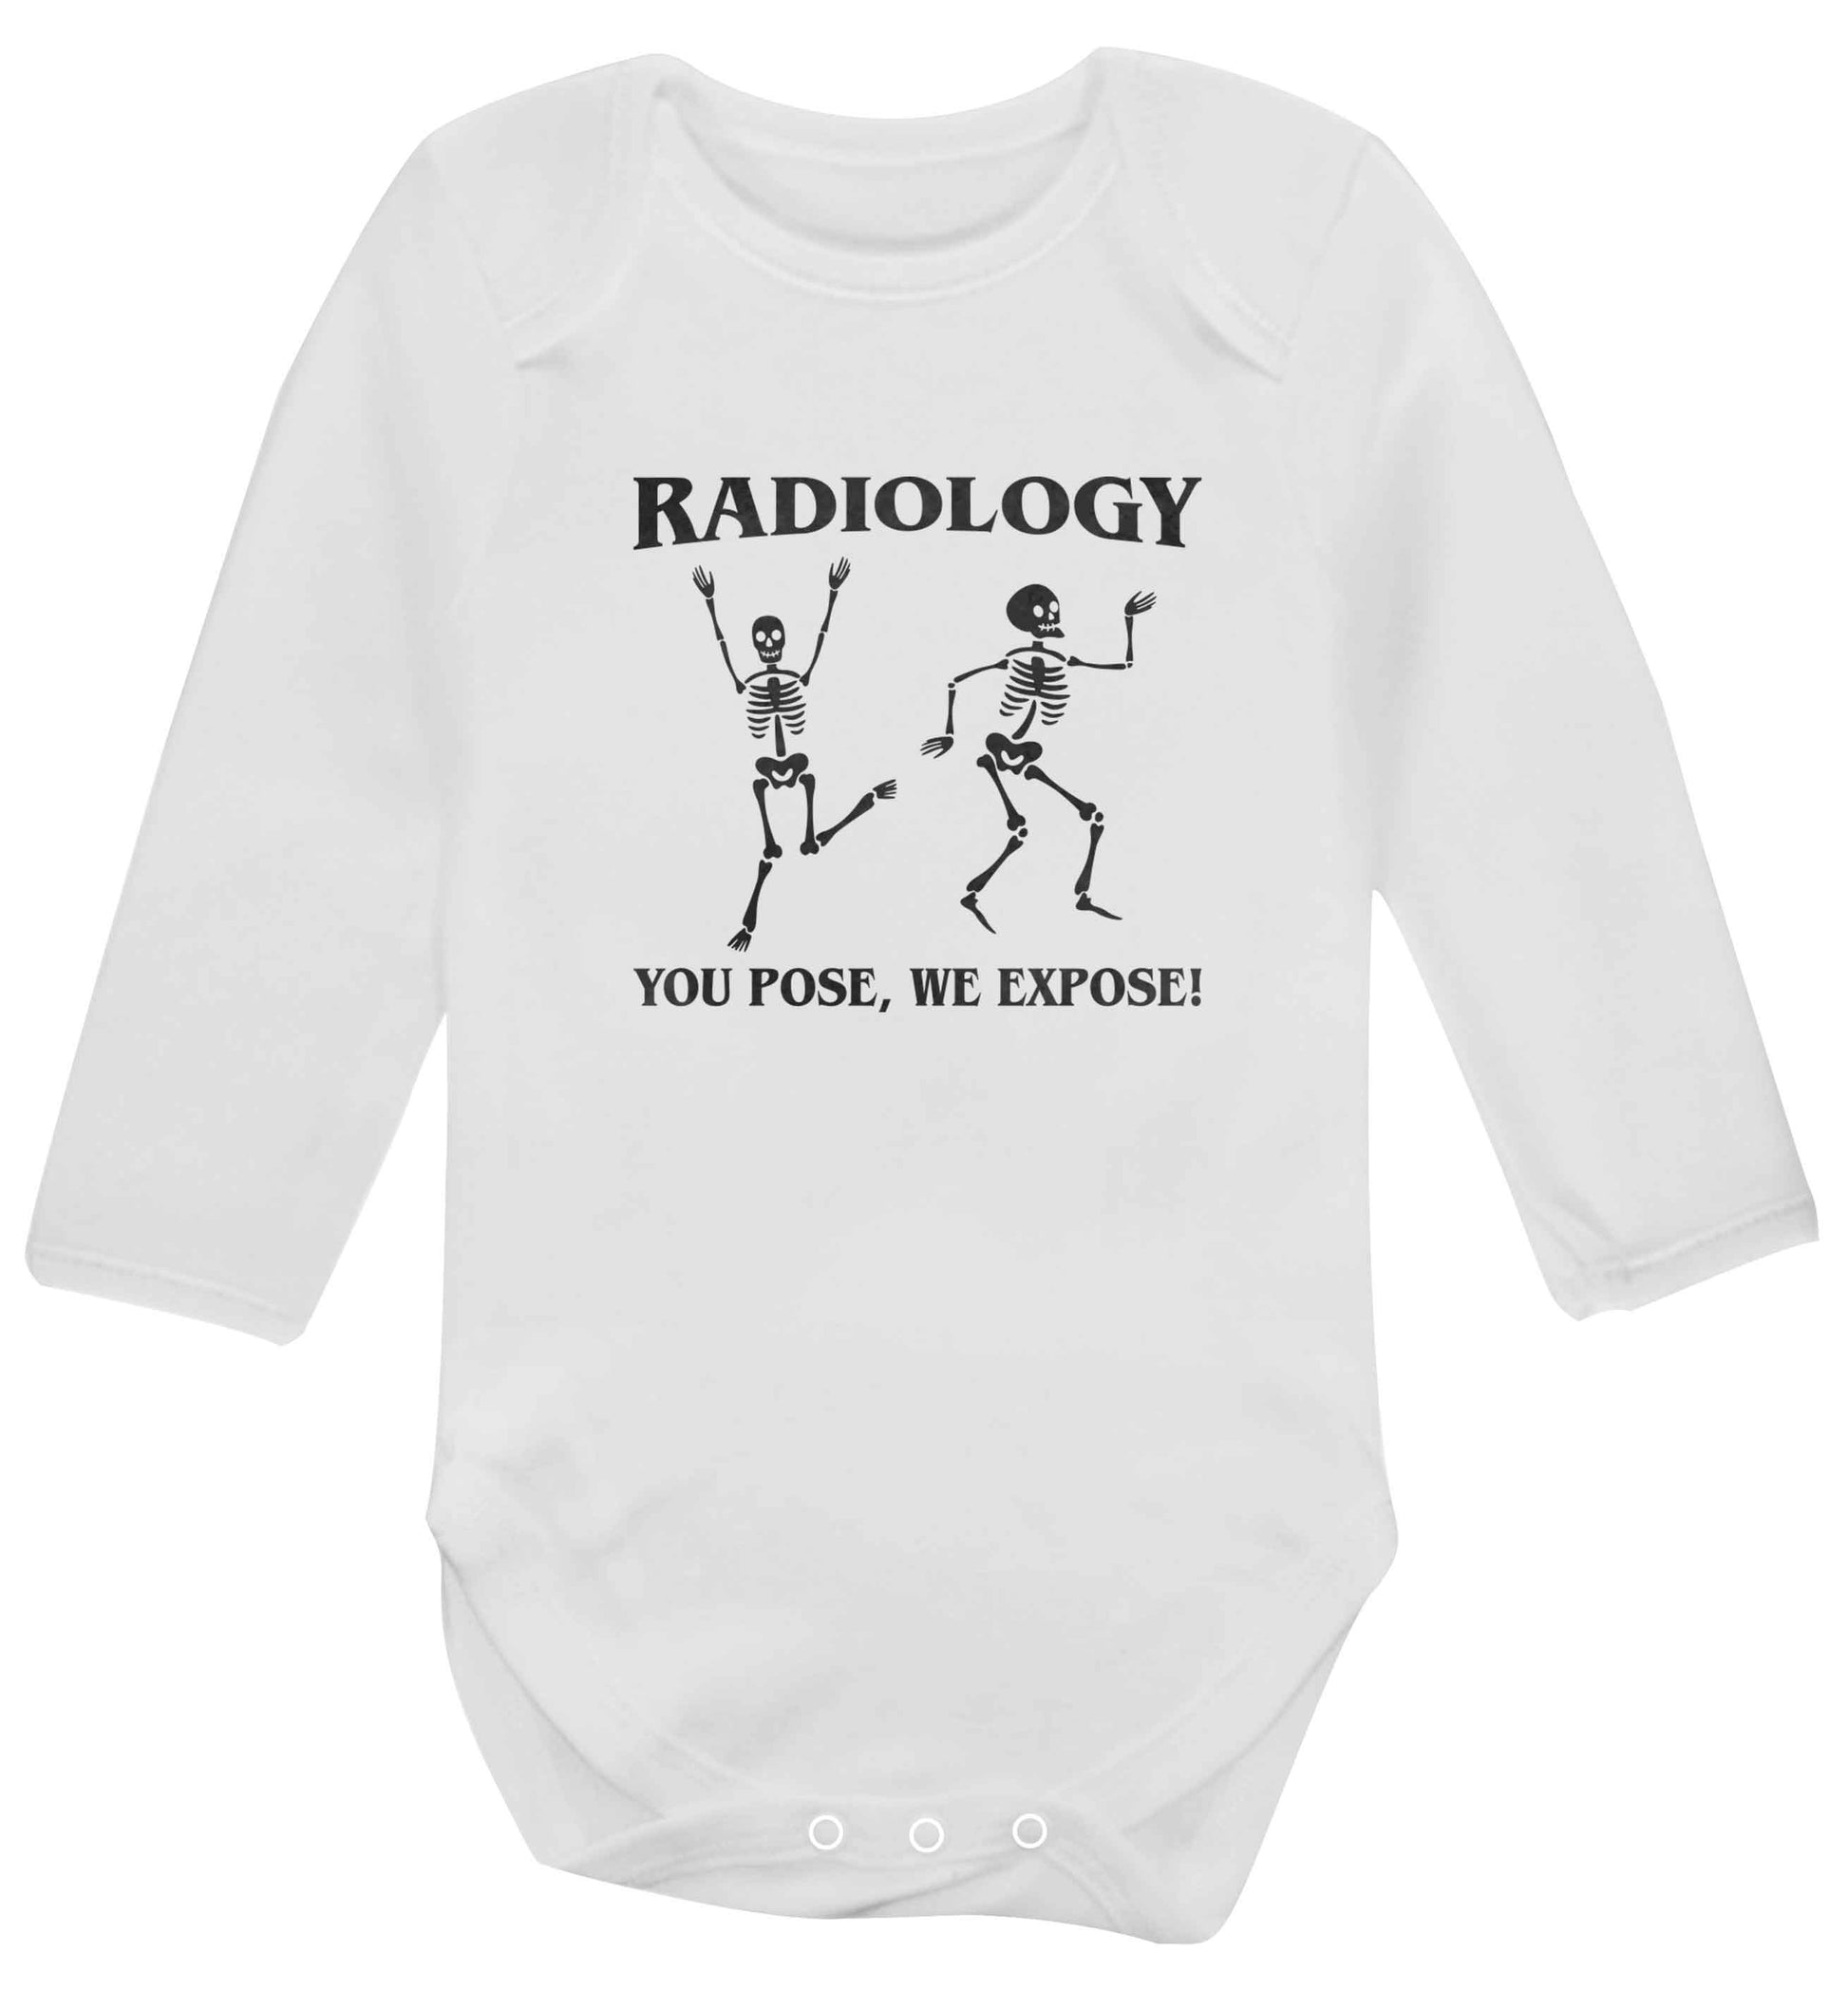 Radiology you pose we expose baby vest long sleeved white 6-12 months